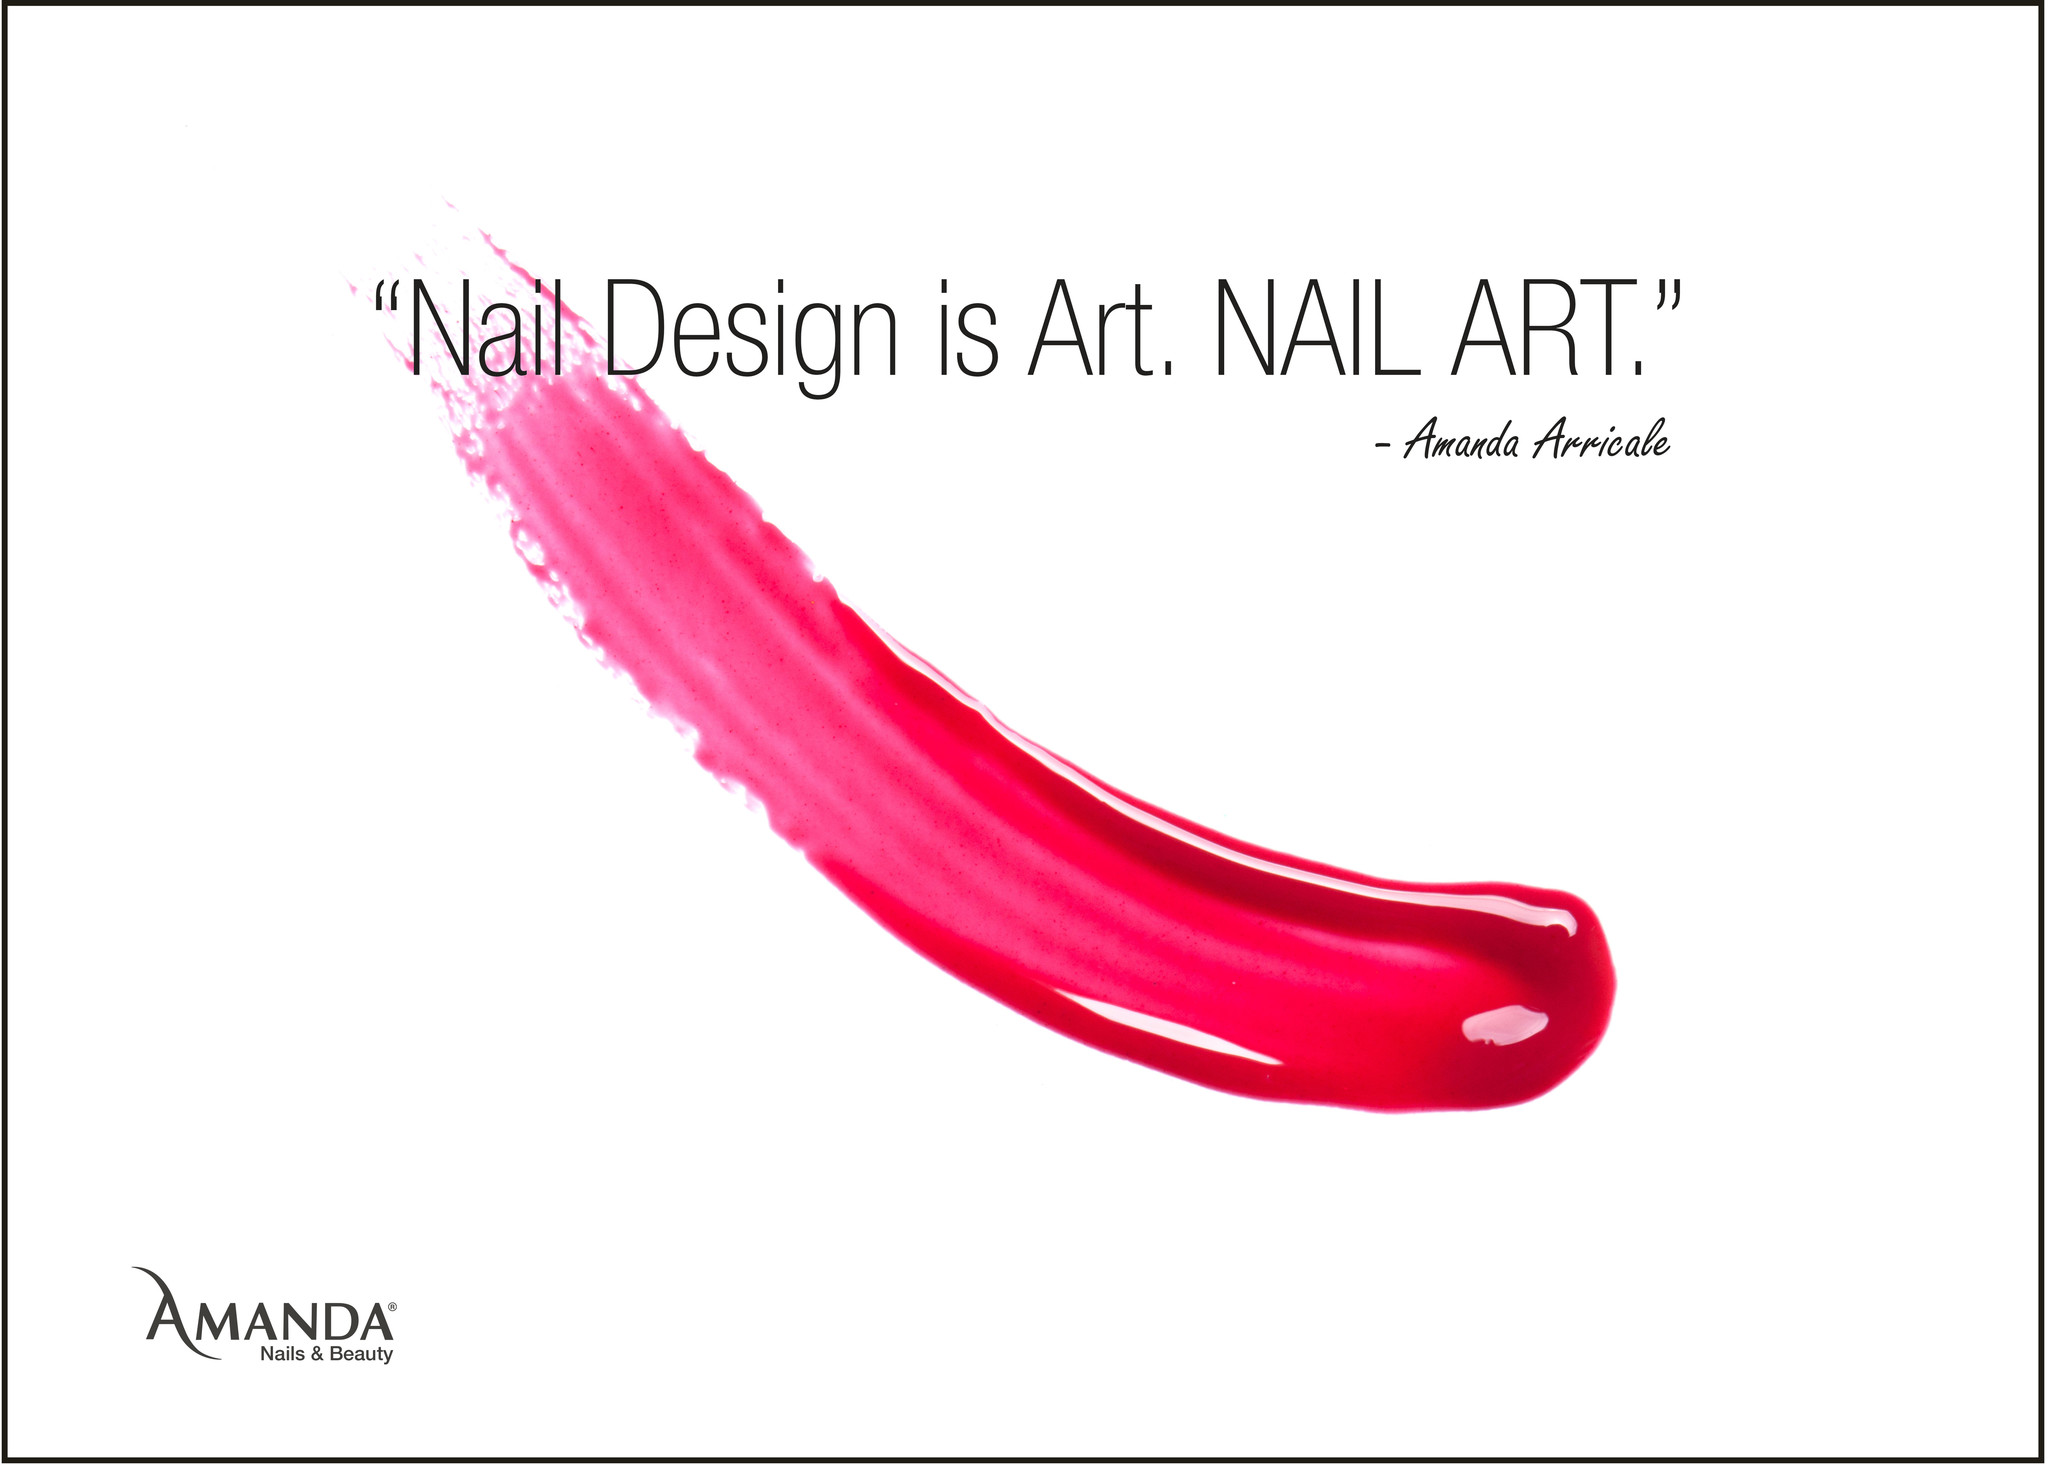 9. Free Nail Art Poster Images - wide 4